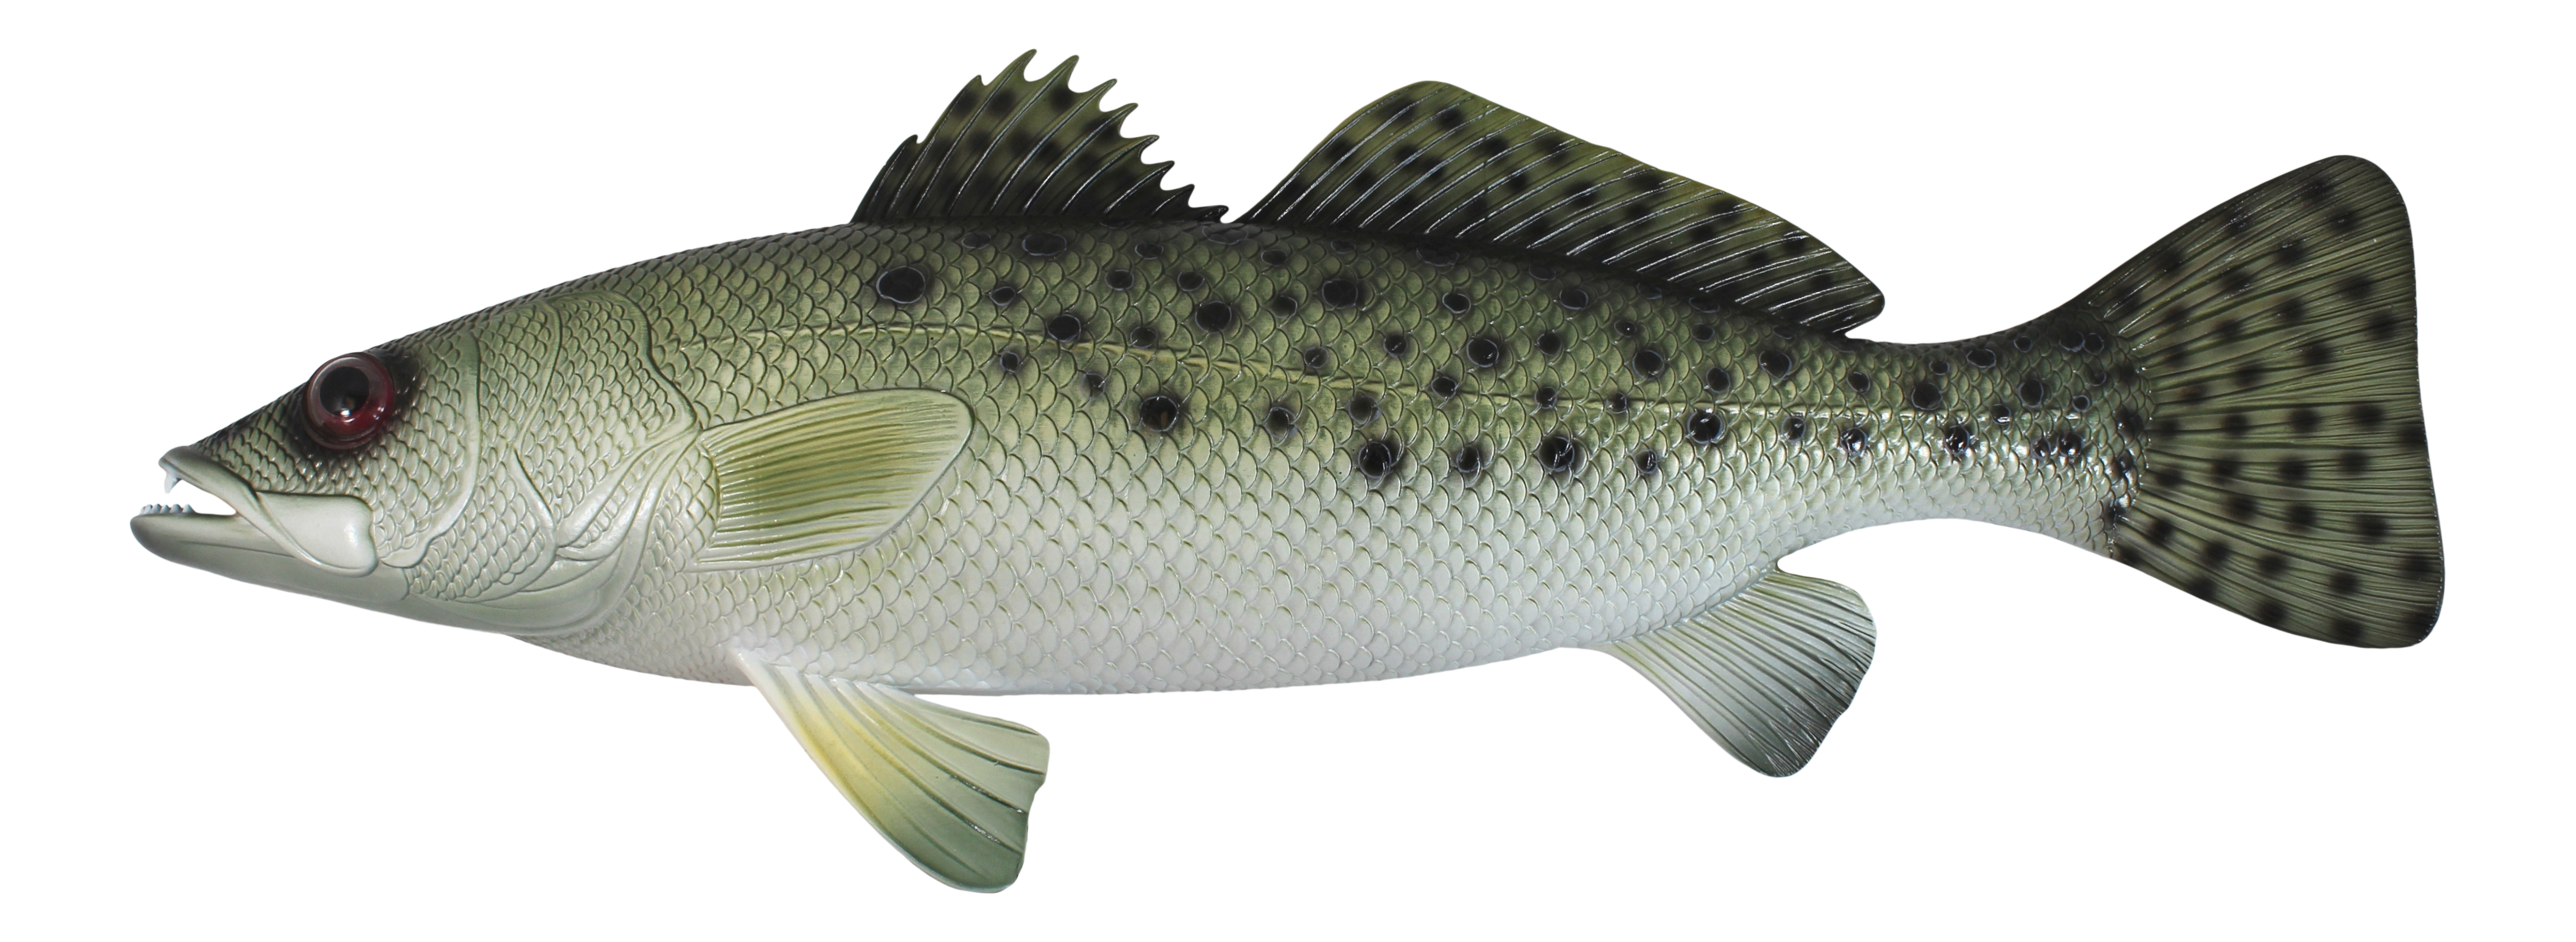 Charlotte International Spotted Sea Trout Replica Nautical Saltwater Fishing Wall Decor 28 Inches